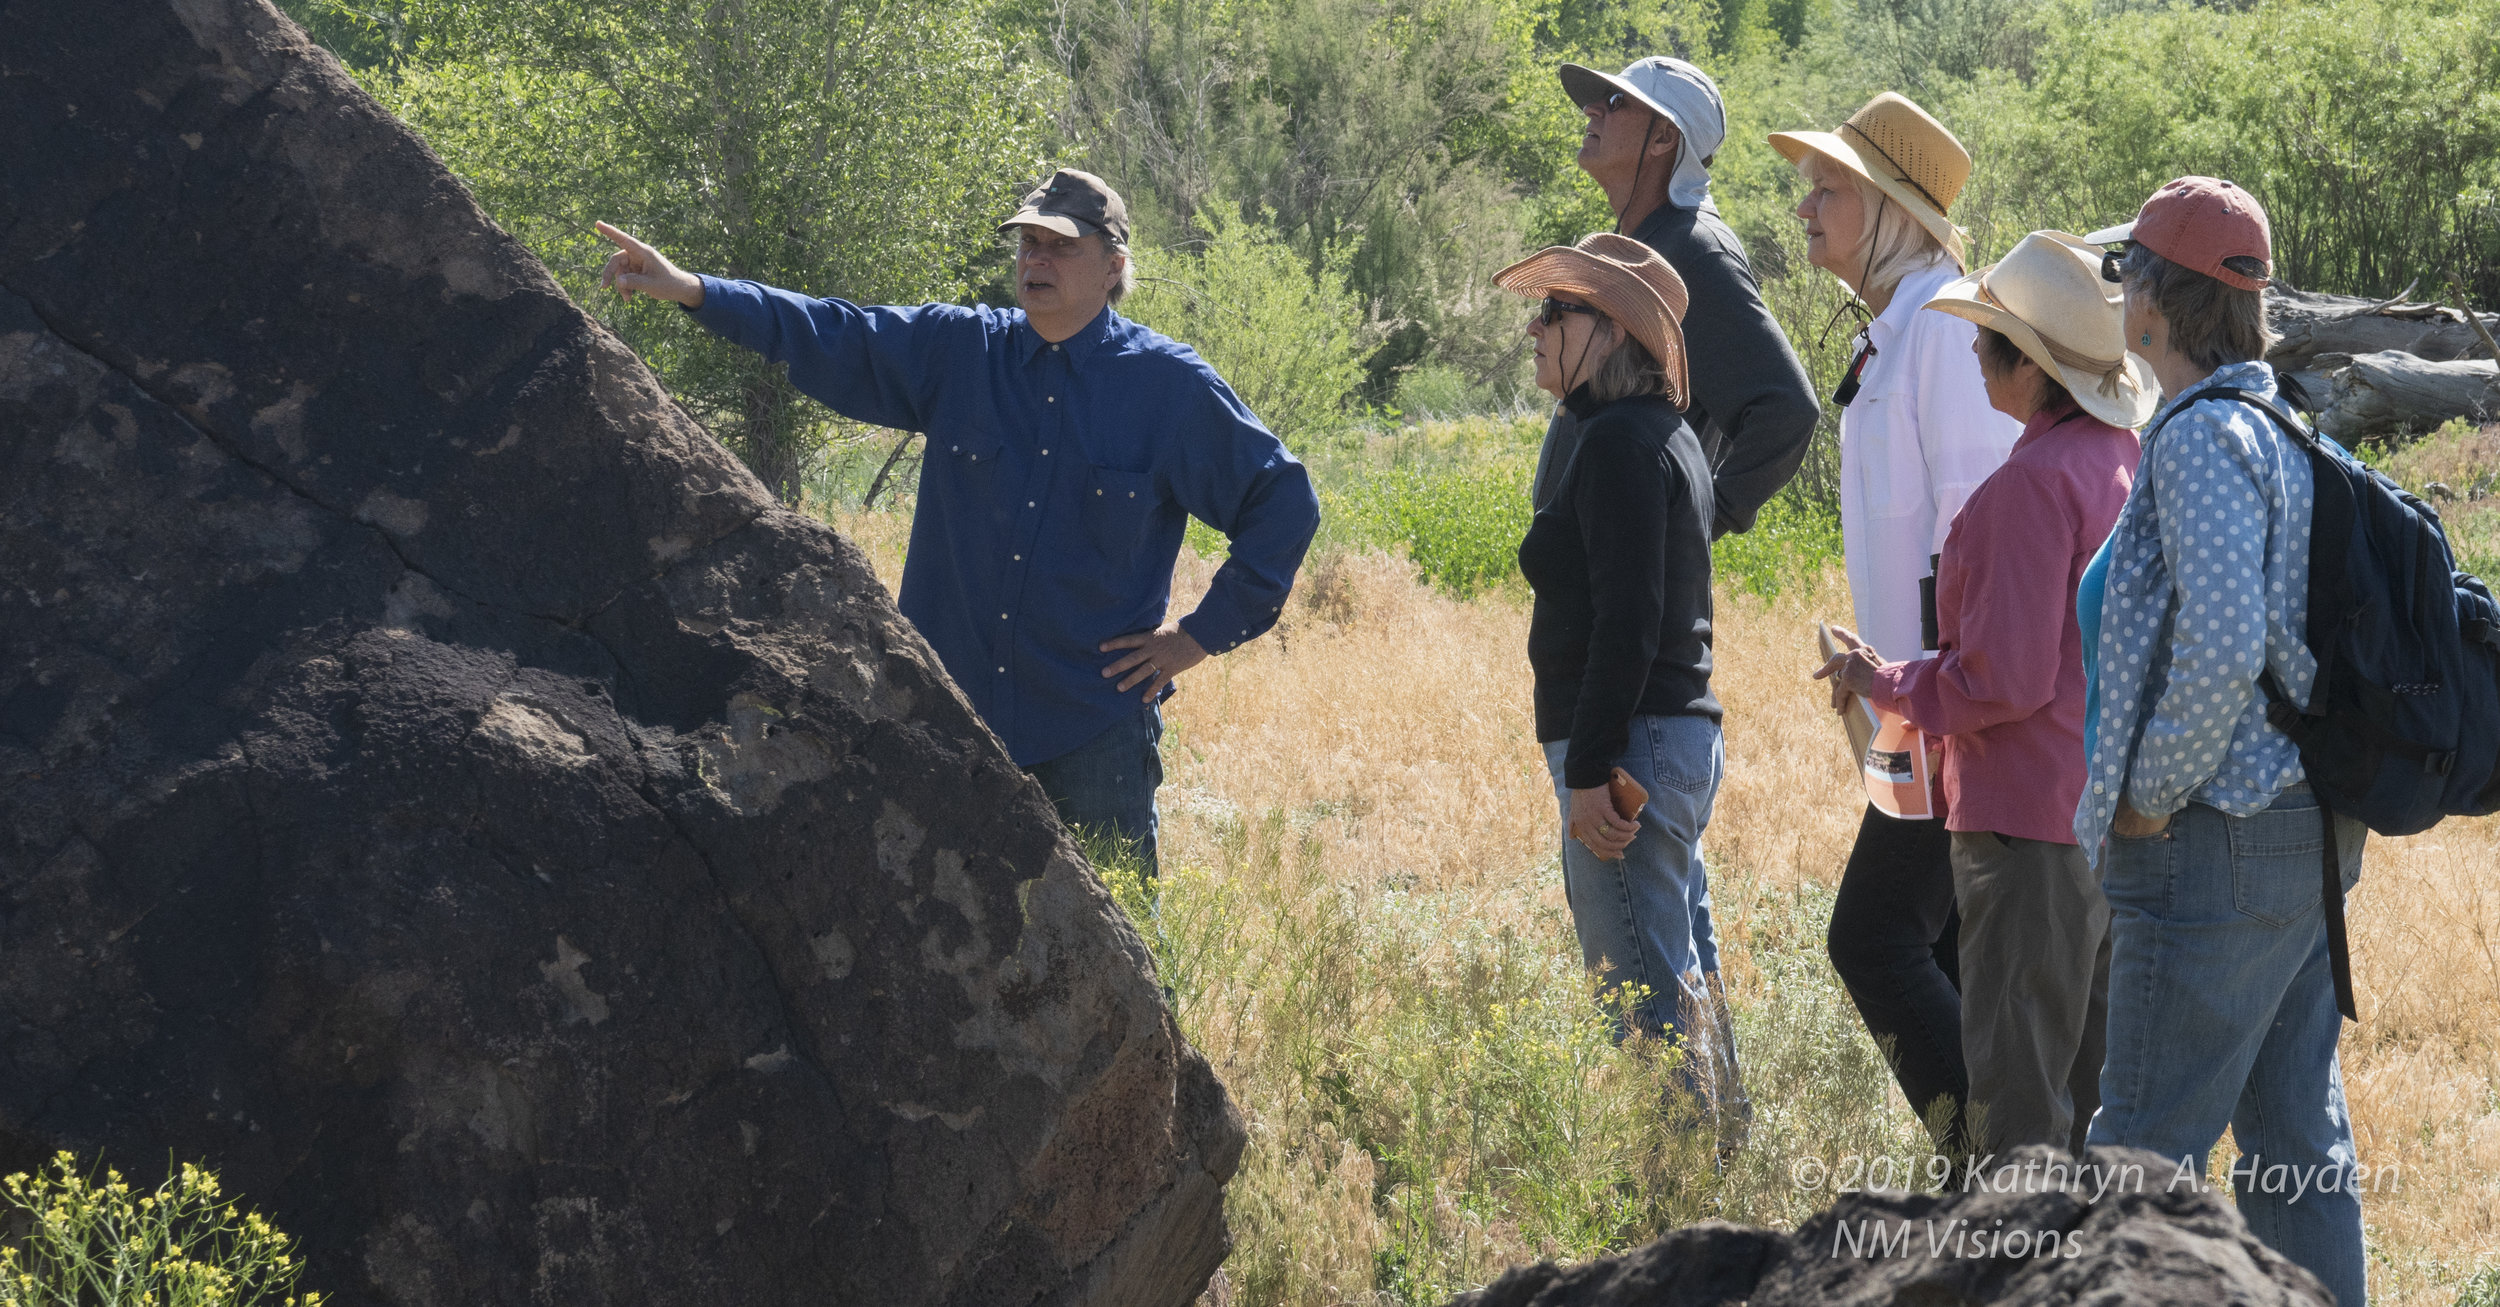  the group listens as Robert points out more petroglyphs and some of the theories about their origins and meanings. 